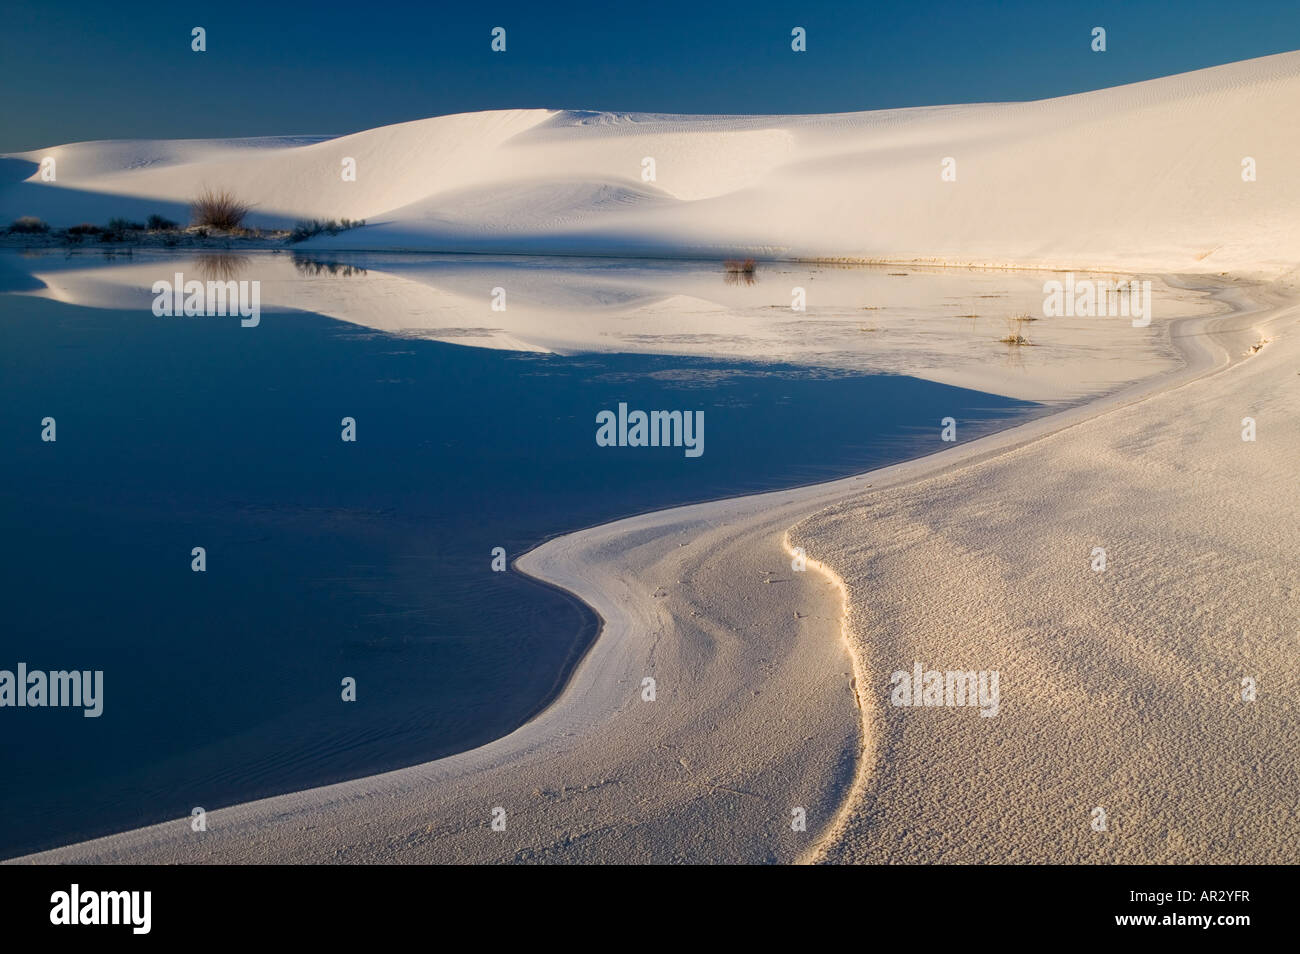 Gypsum sand dunes and pool of water, White Sands National Monument, New Mexico USA Stock Photo